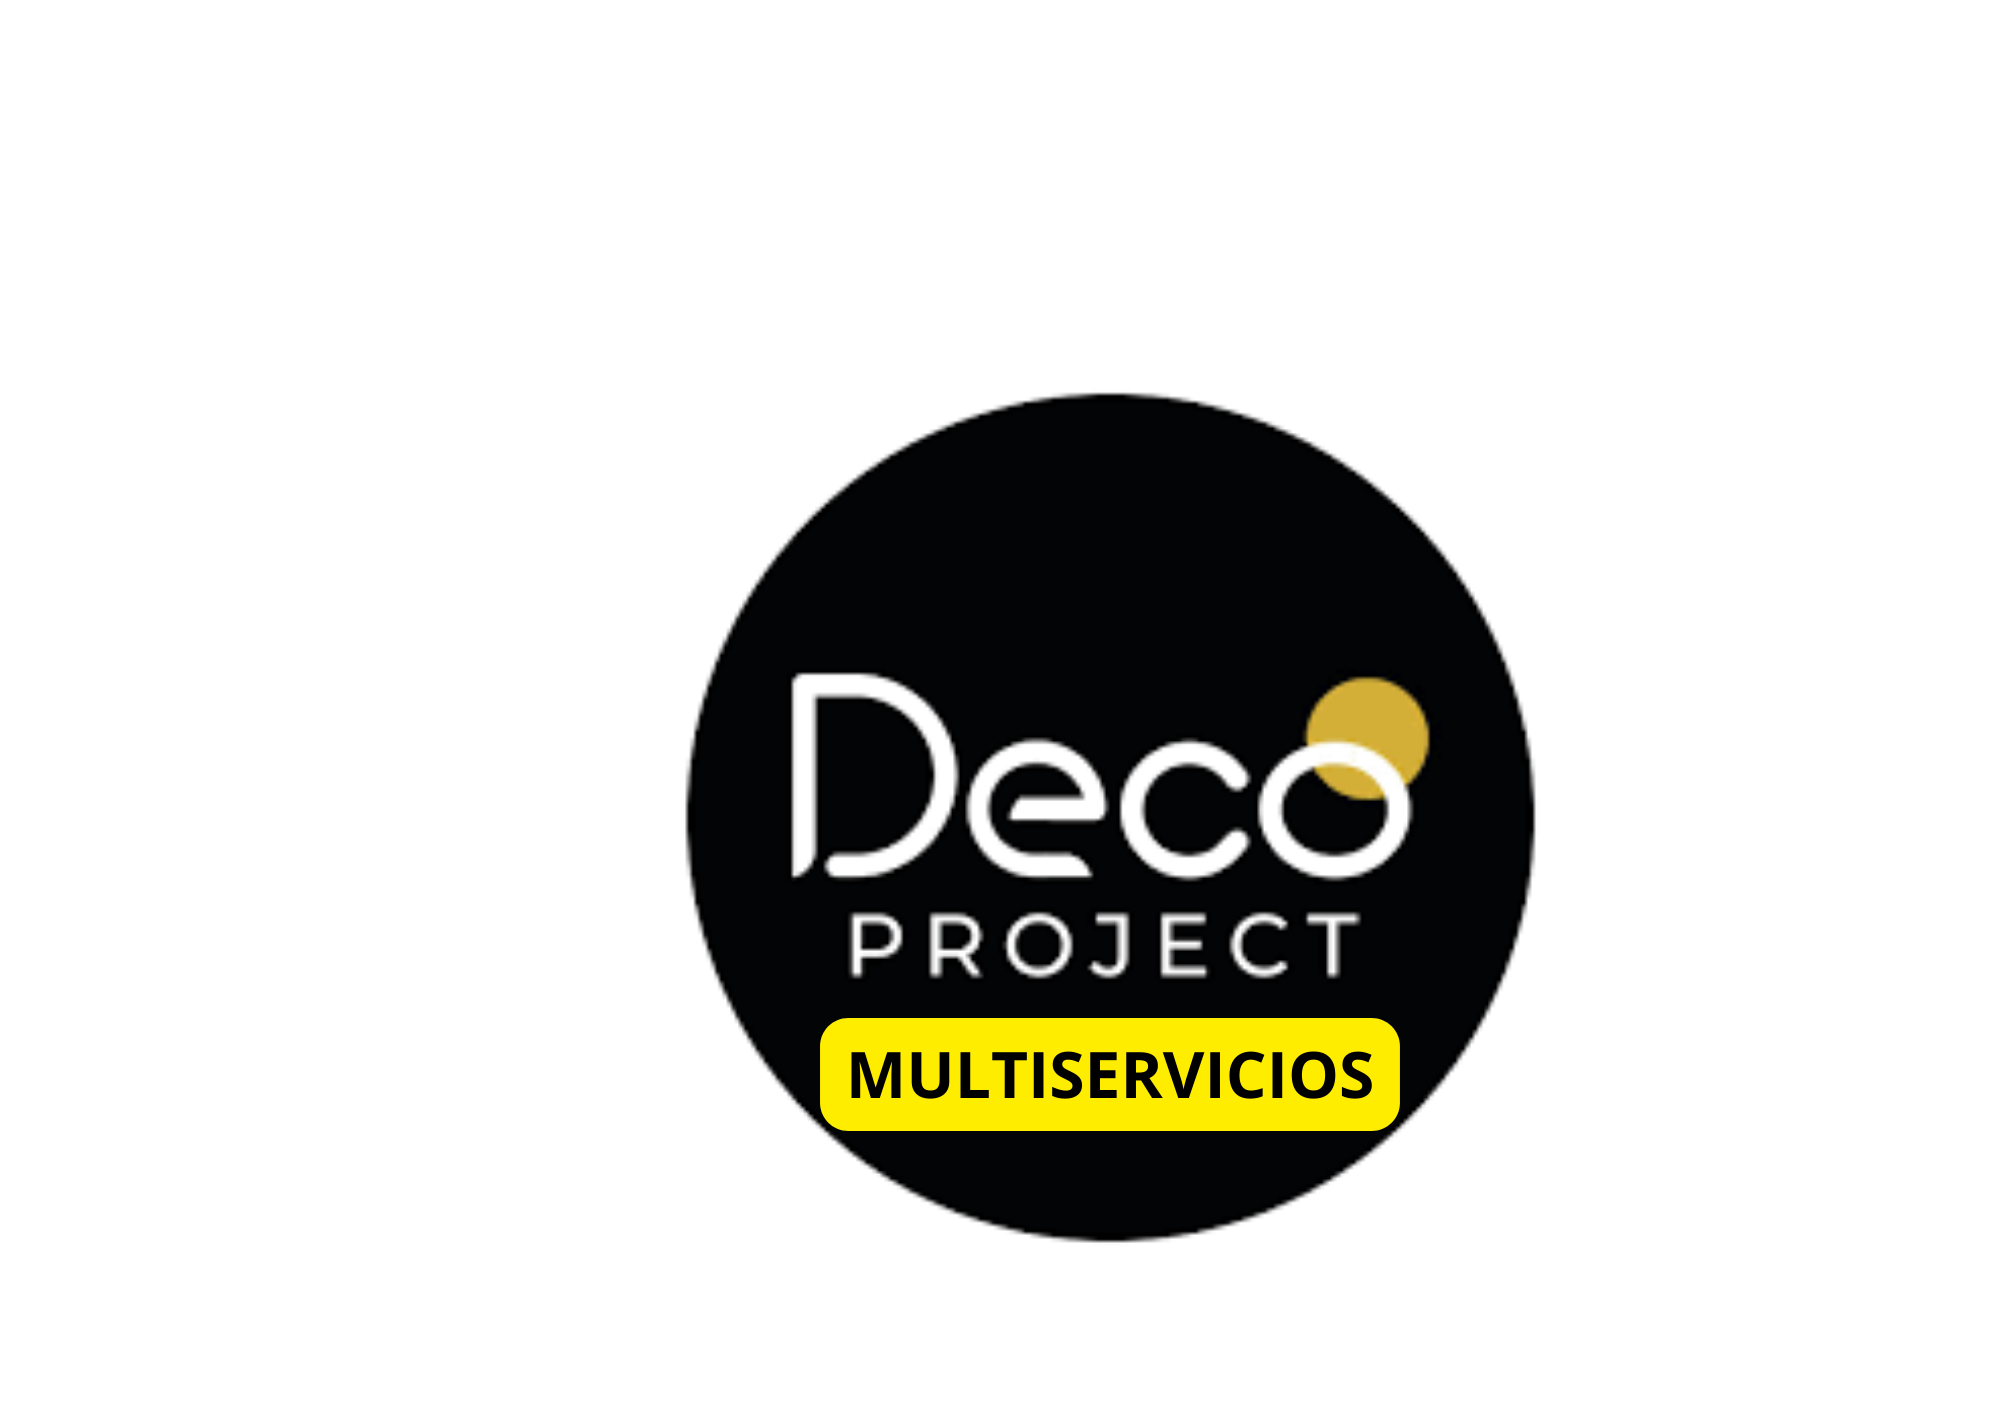 PDlYel;

PROJECT

MULTISERVICIOS